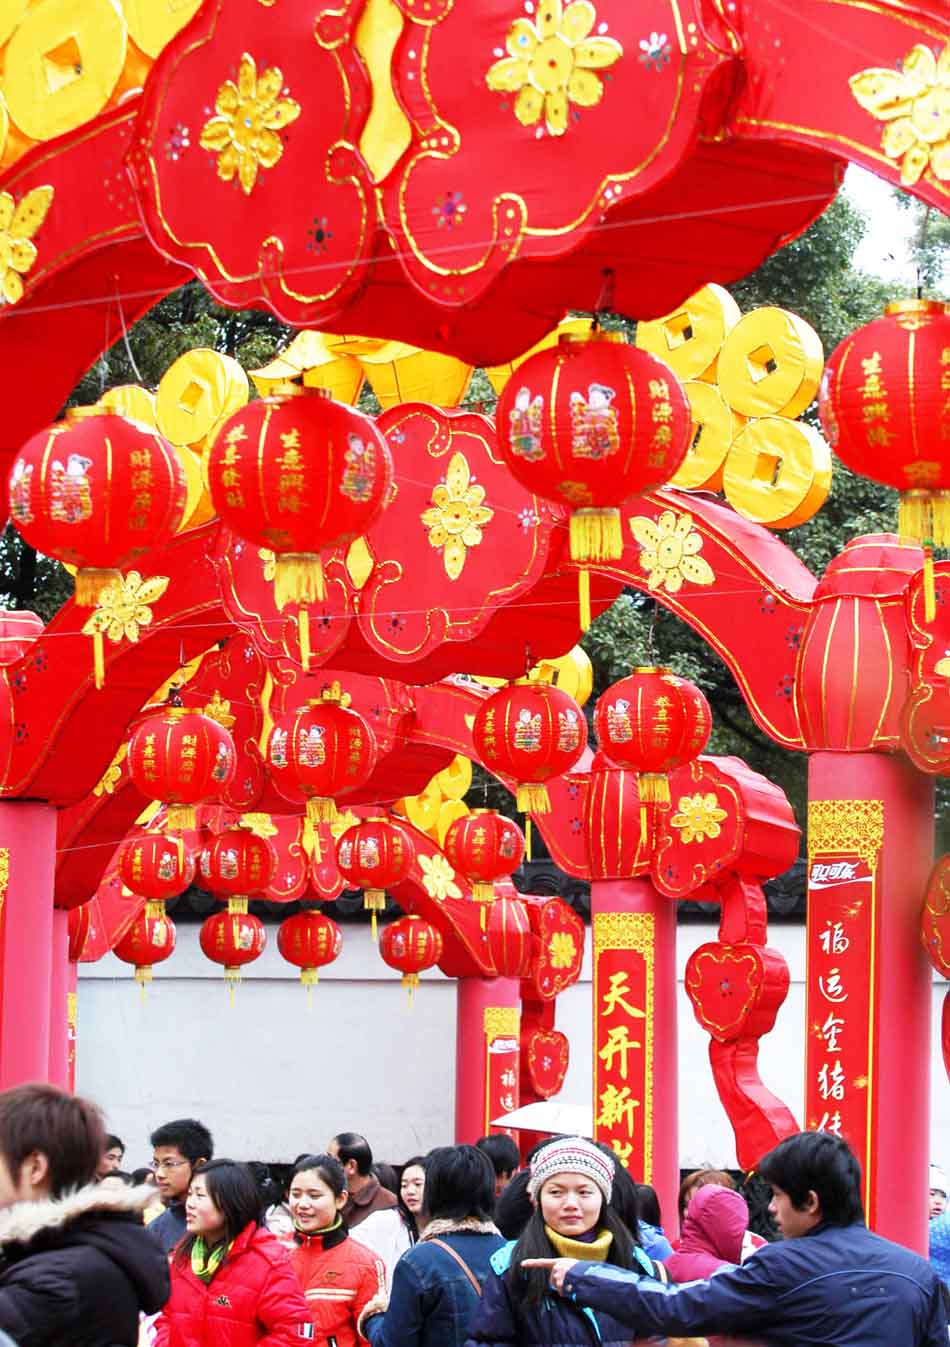 Photo taken on Feb. 16, 2007 shows tourist strolling under festival lanterns made by Su Yubo's workshop, in the Yuyuan Park, east China's Shanghai. (Xinhua/Zhao Jun)